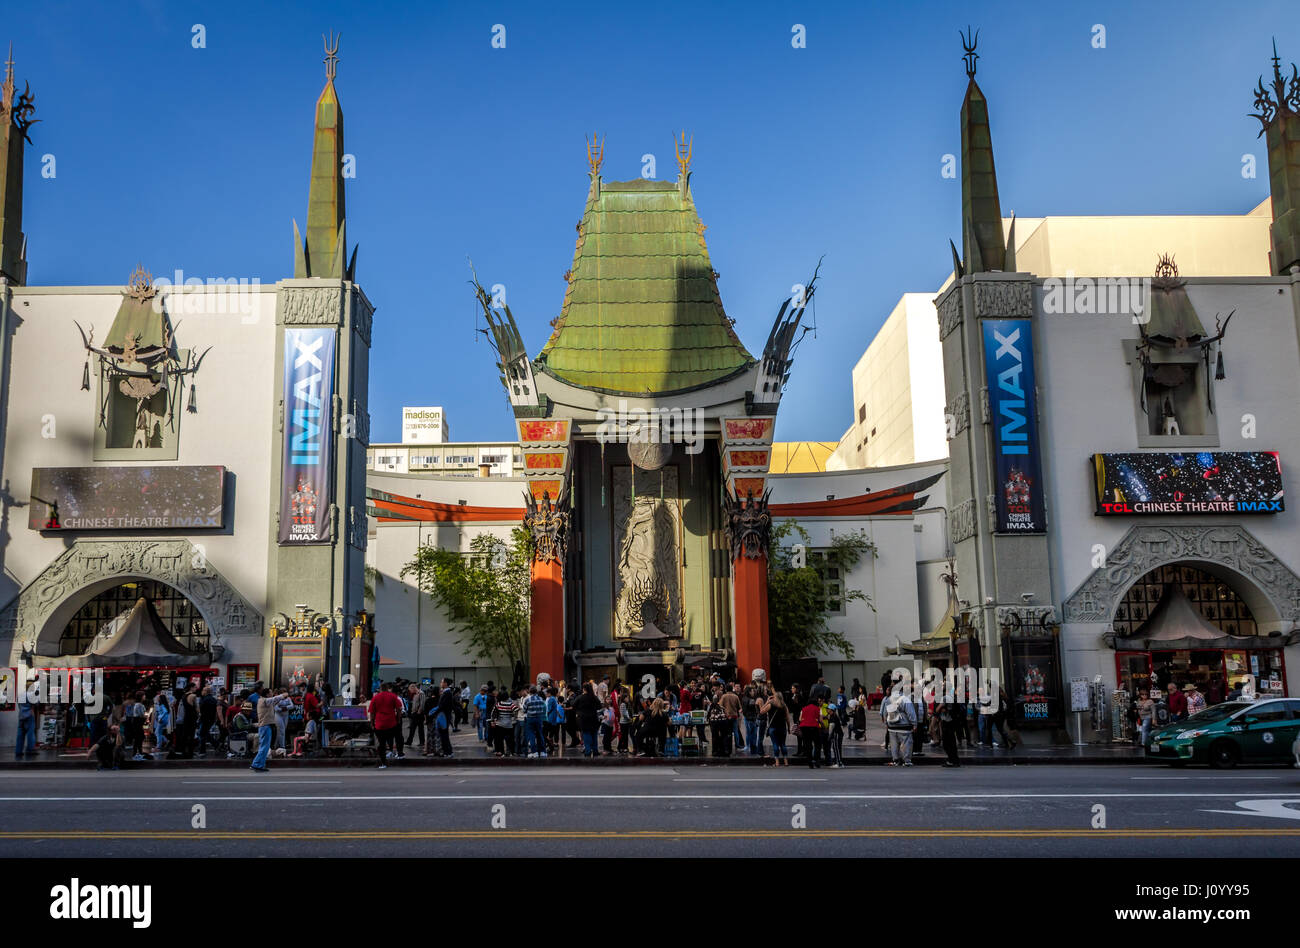 Graumans Chinese Theater On Hollywood Boulevard Los Angeles California J0YY95 